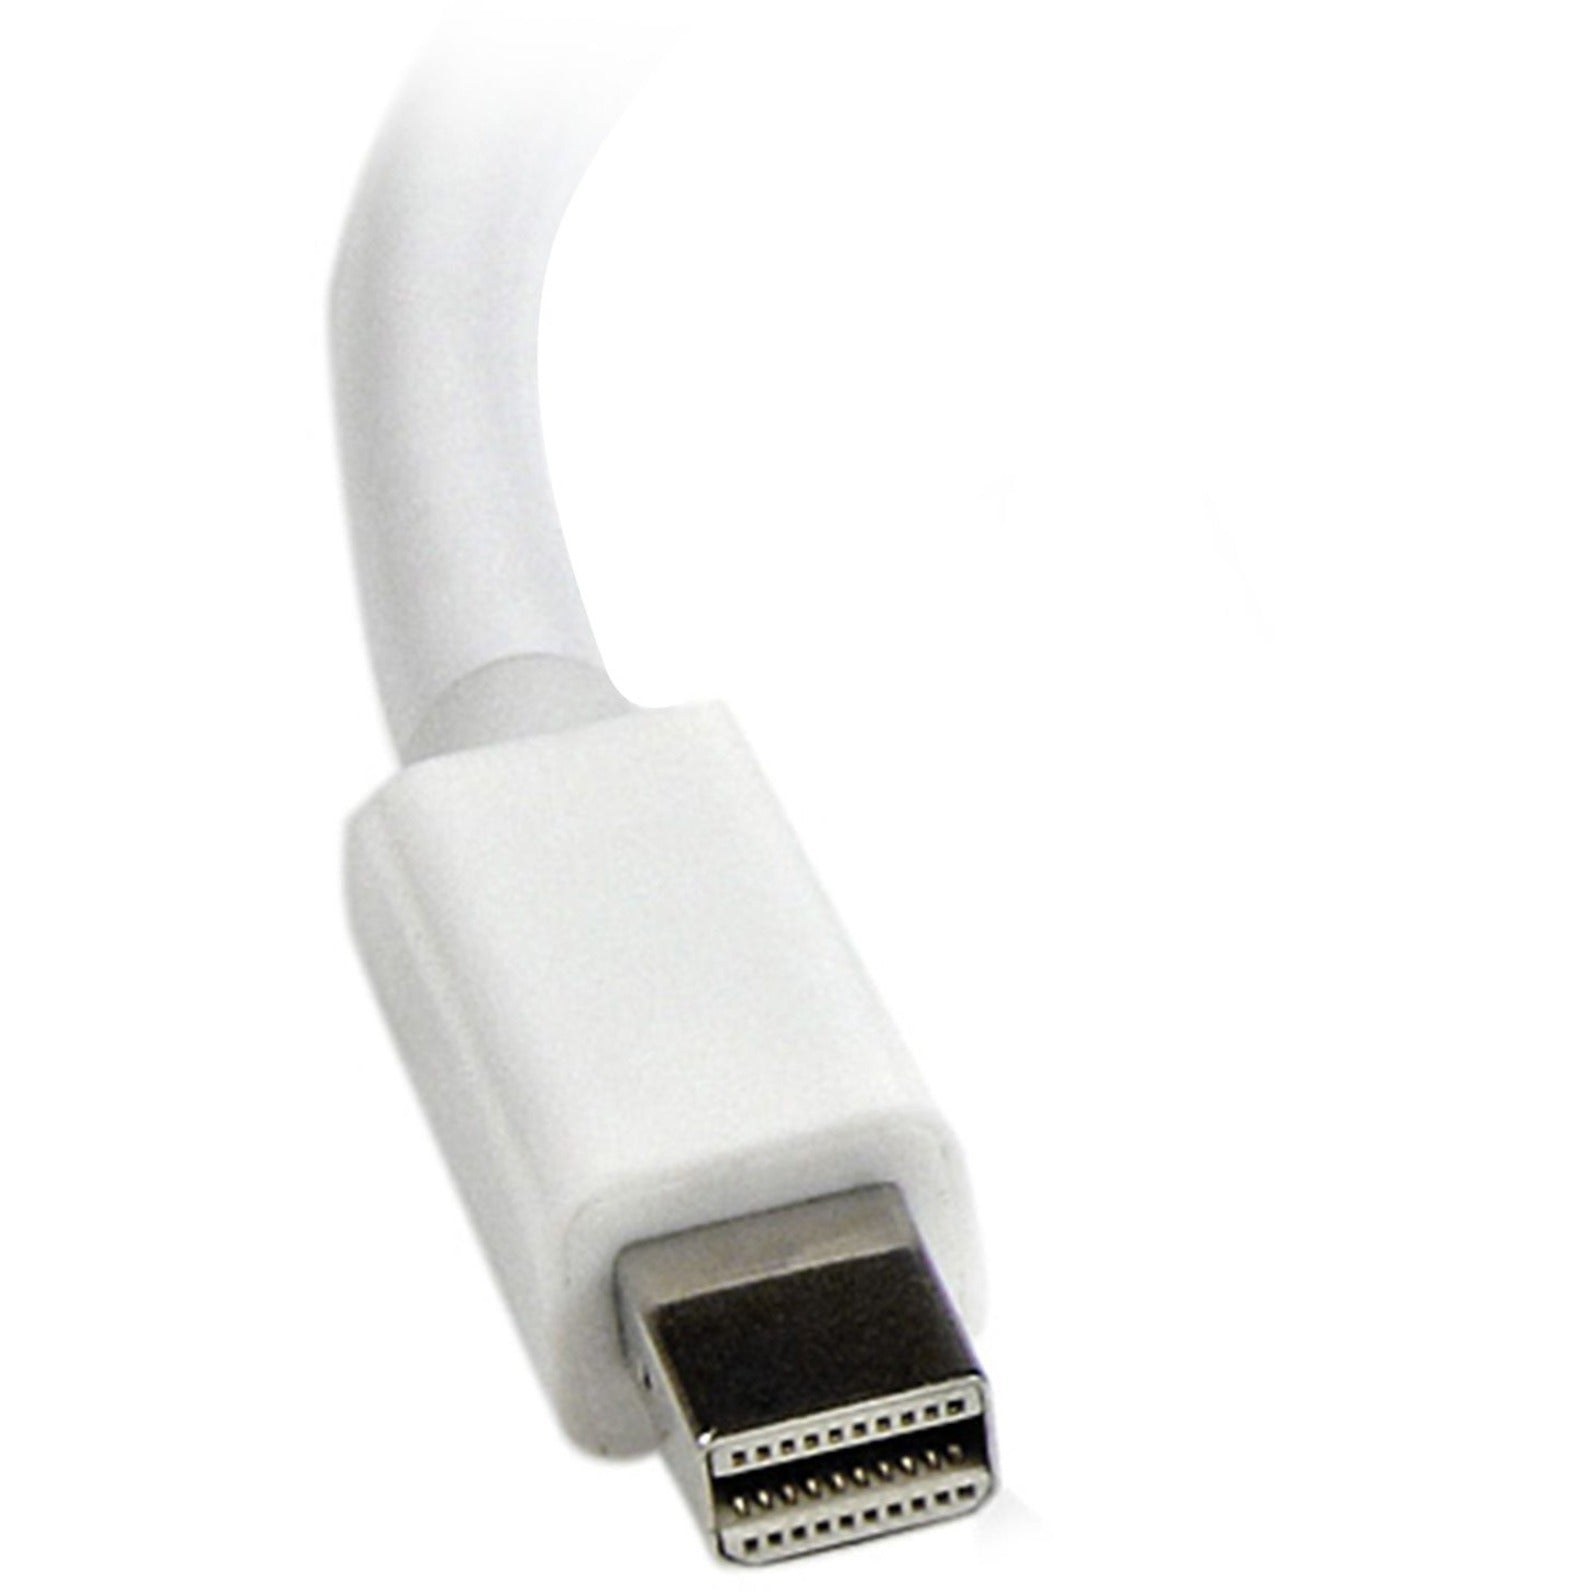 StarTech.com MDP2VGAW Mini DisplayPort to VGA Video Adapter Converter - White, Simple Plug and Play Solution